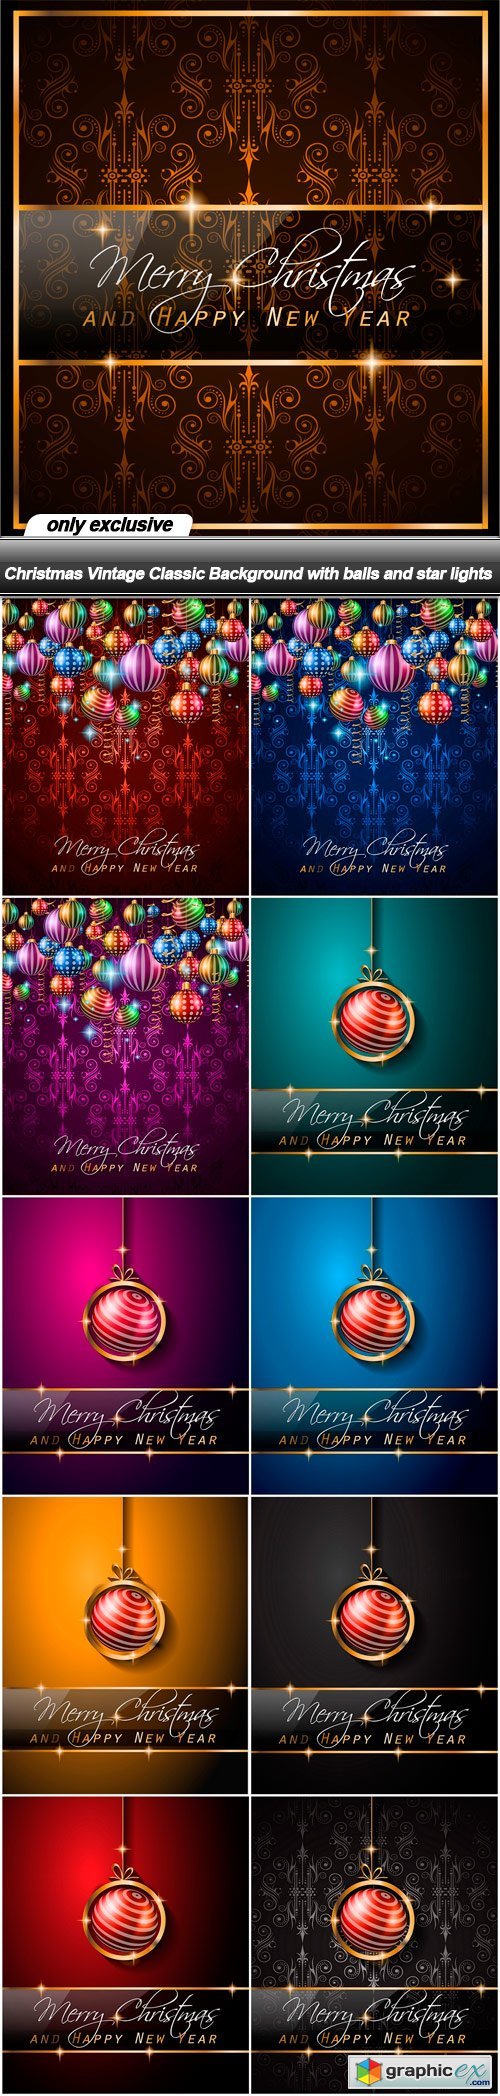 Christmas Vintage Classic Background with balls and star lights - 21 EPS